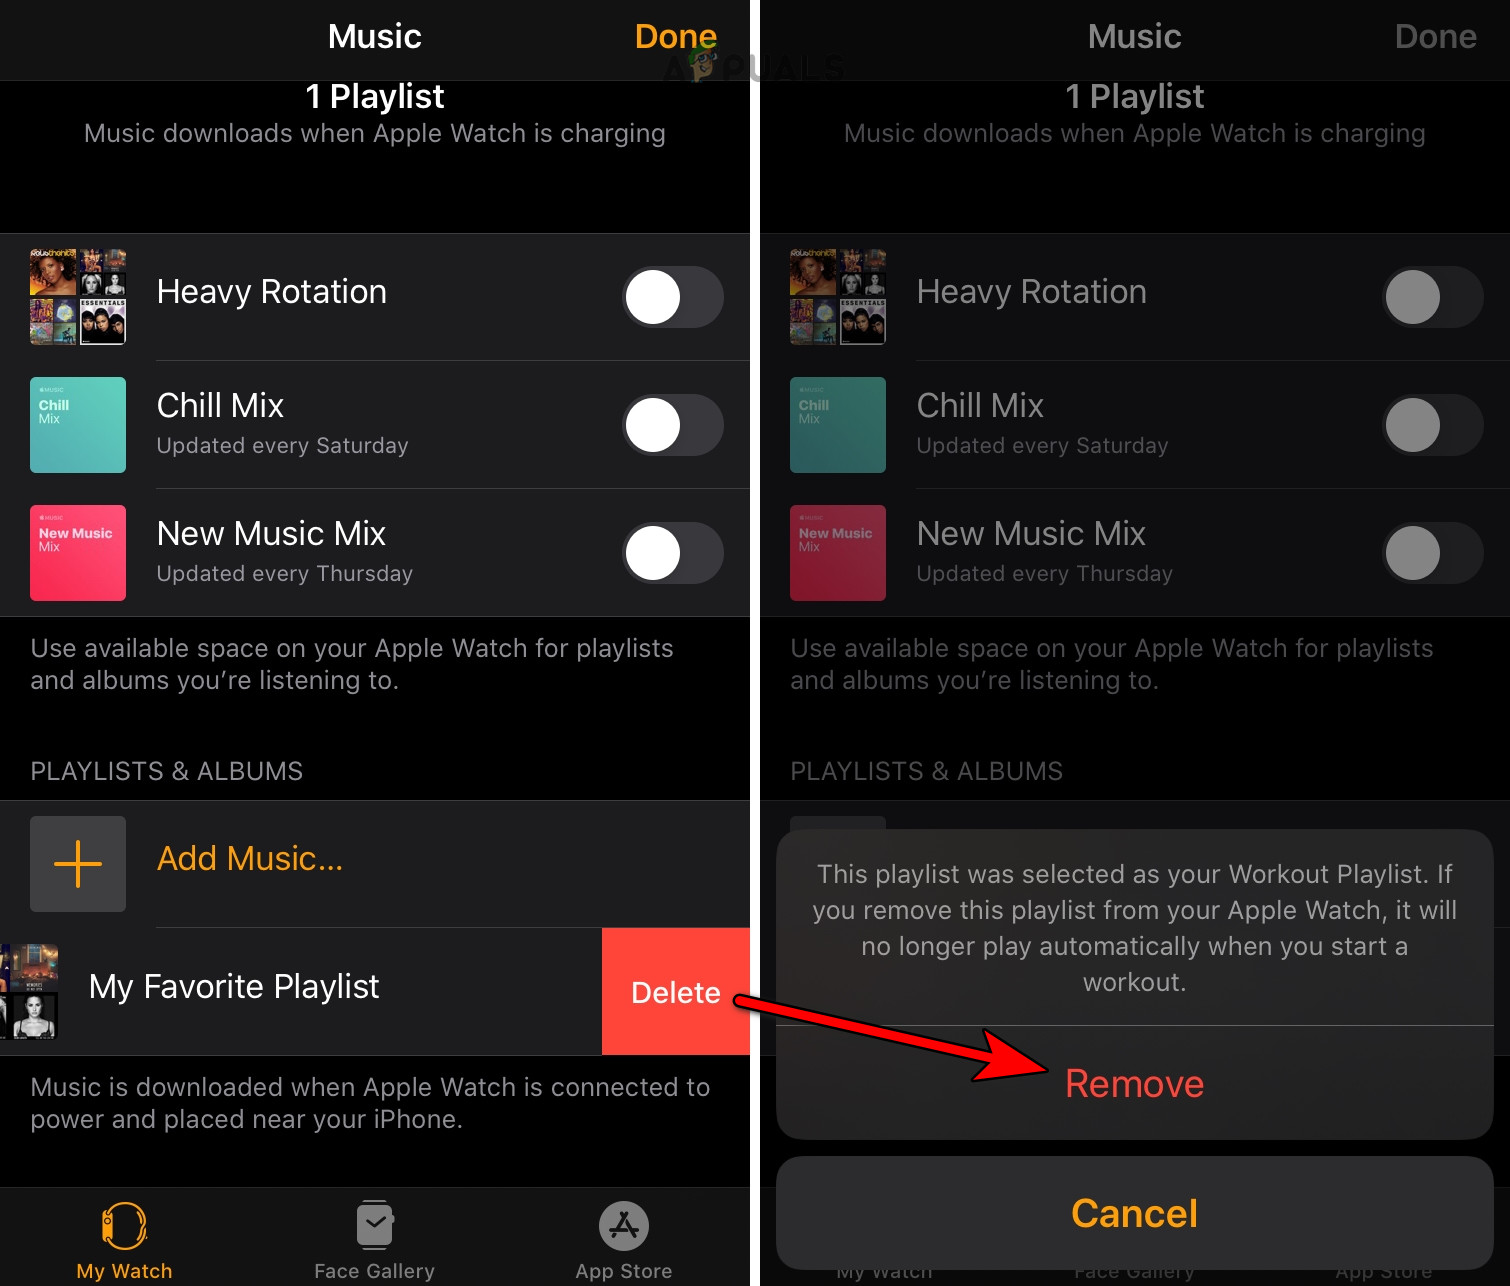 Remove Offline Playlists from the Apple Watch